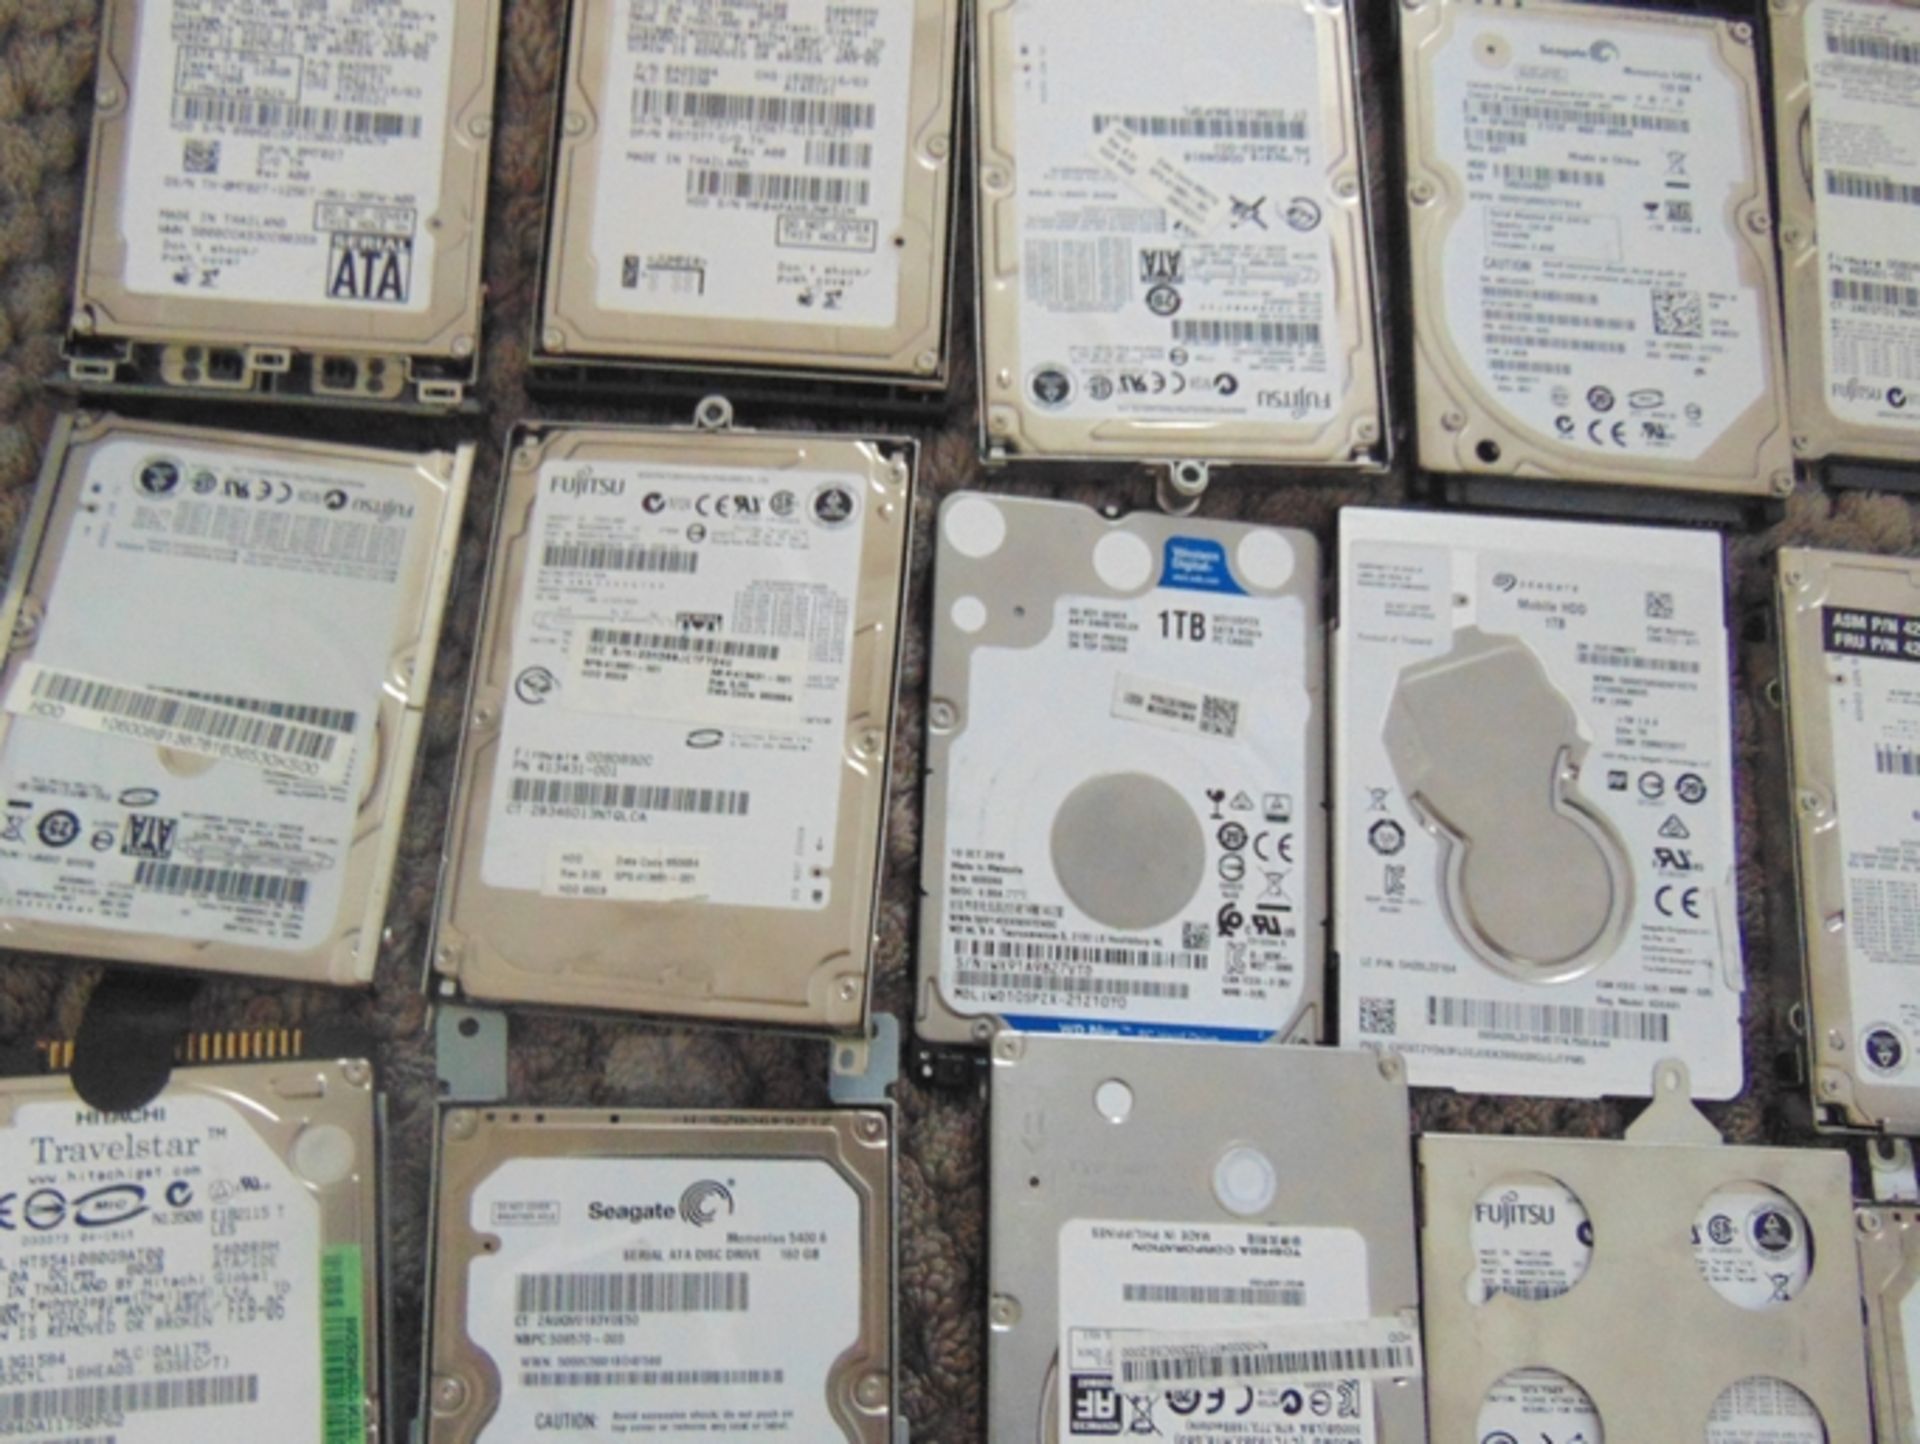 20+ hard drives from 80gb to 1 tb these came - Image 2 of 2